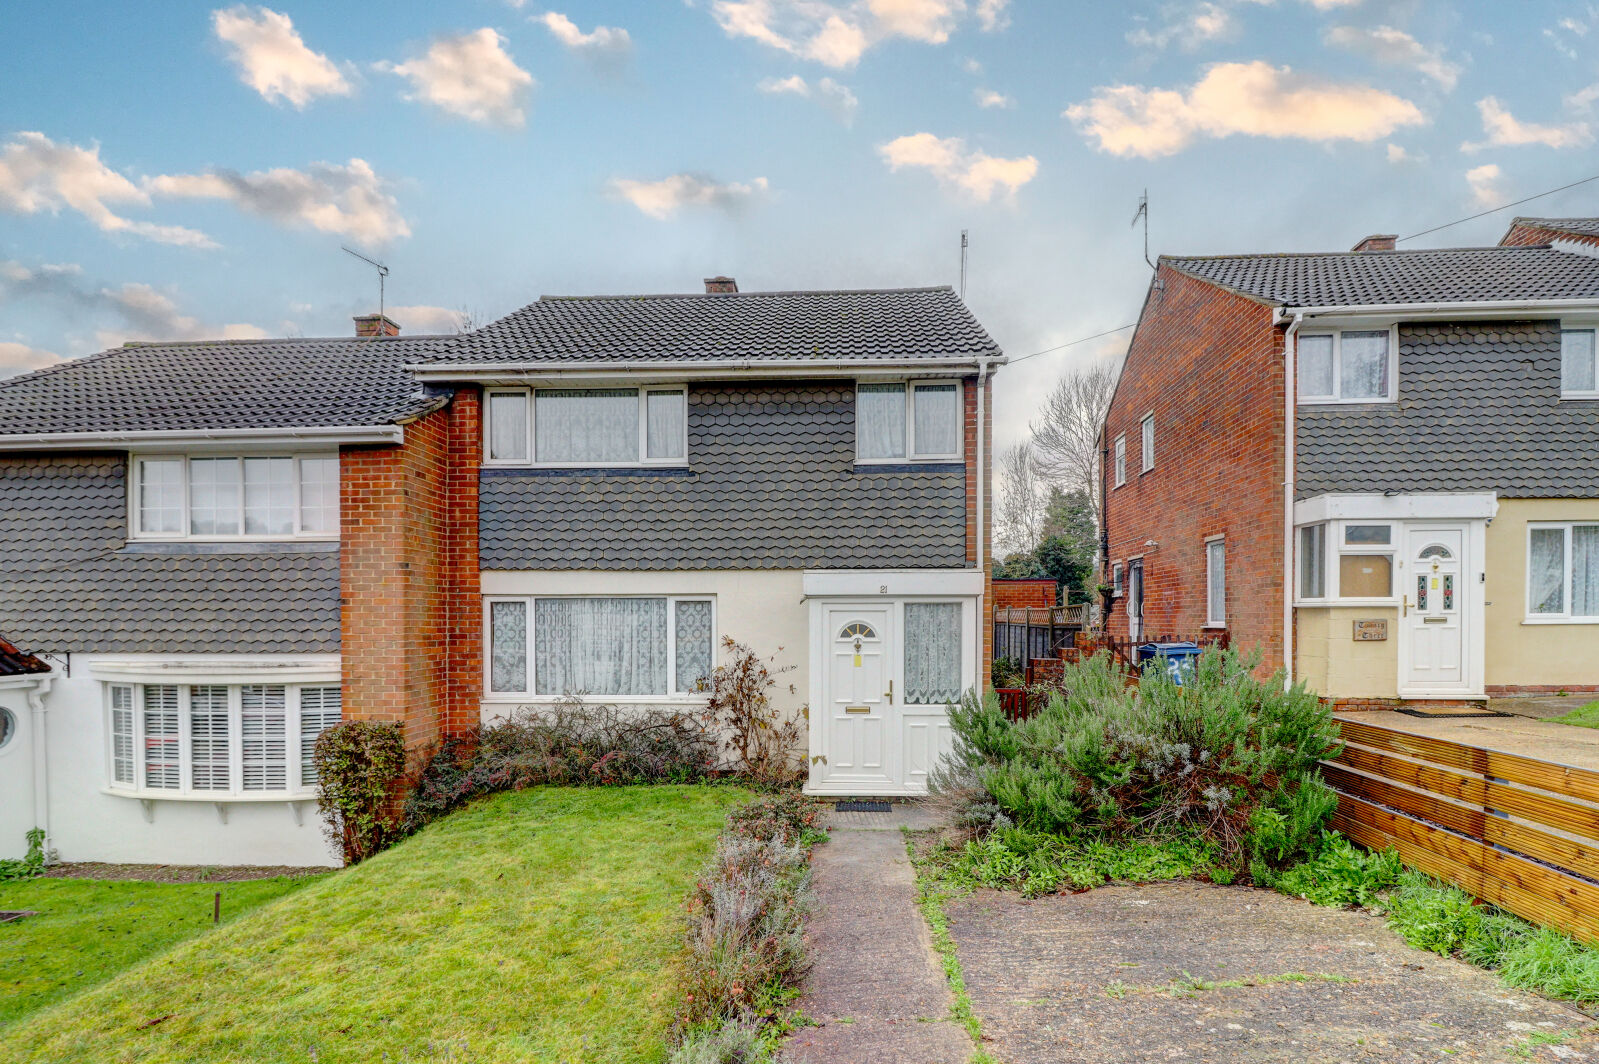 3 bedroom semi detached house for sale St. Hughs Avenue, High Wycombe, HP13, main image